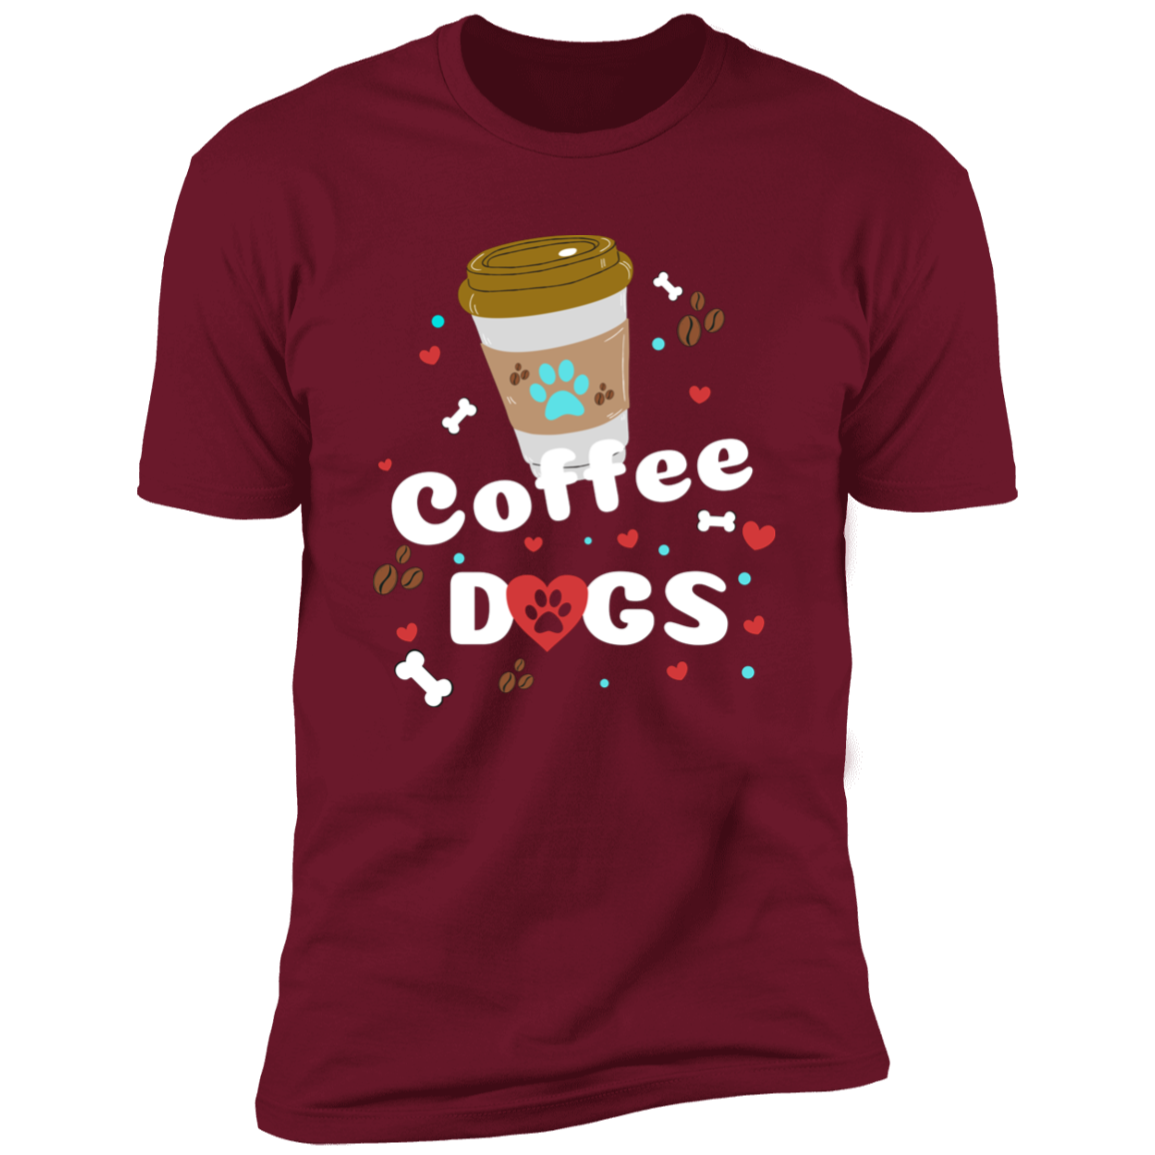 To go Coffee Dogs T-shirt, Dog Shirt for humans, in cardinal red